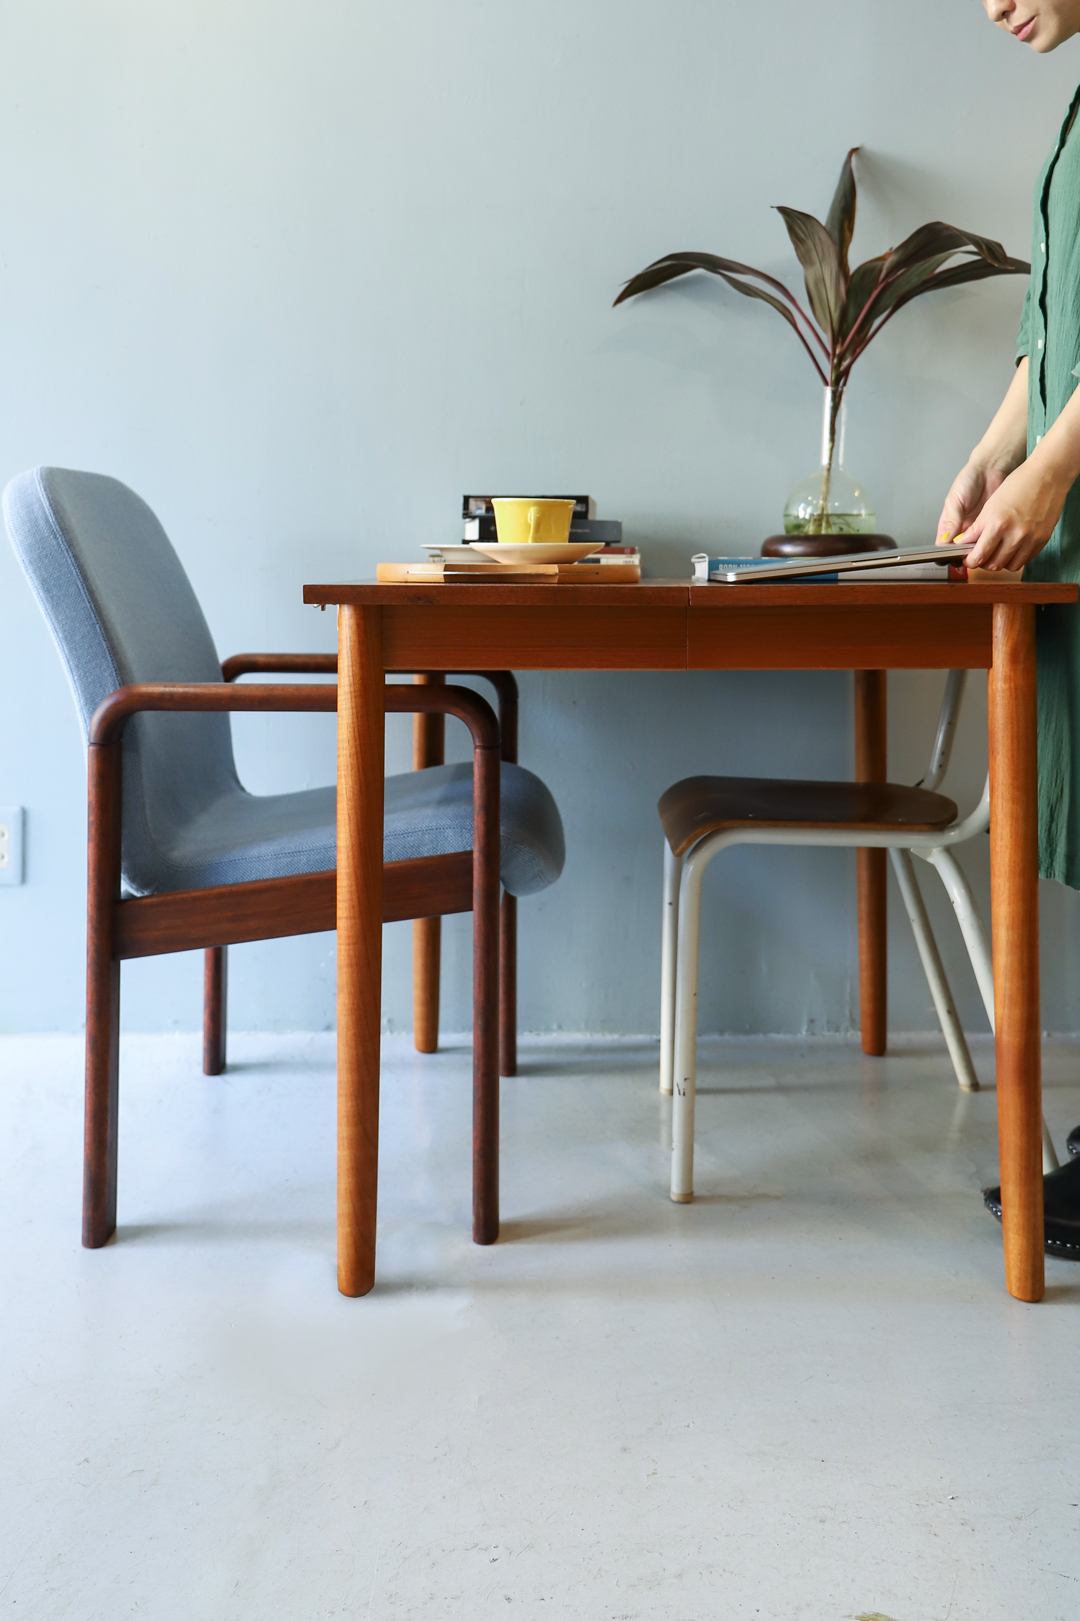 Danish Vintage Extension Dining Table/デンマーク ヴィンテージ エクステンション ダイニングテーブル チーク材 北欧モダン